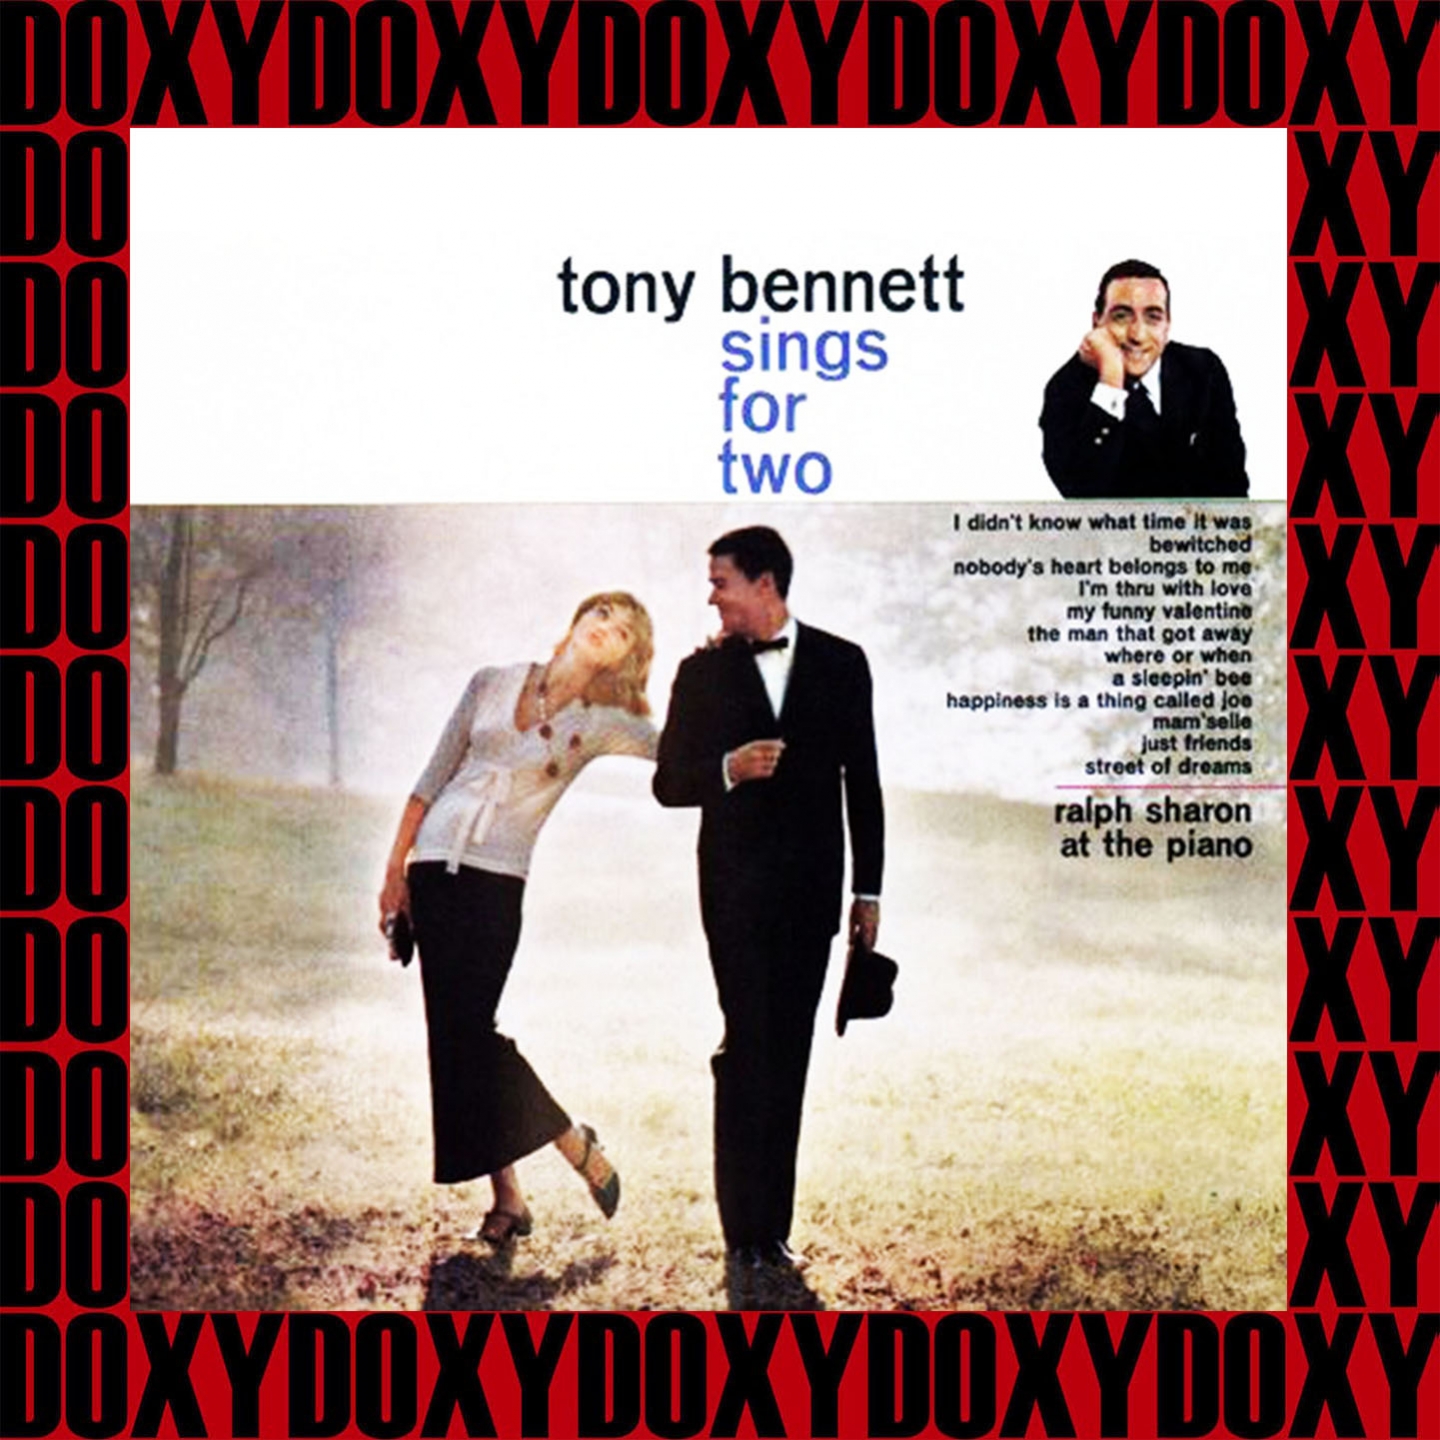 Tony Bennett Sings For Two (Remastered Version) (Doxy Collection)